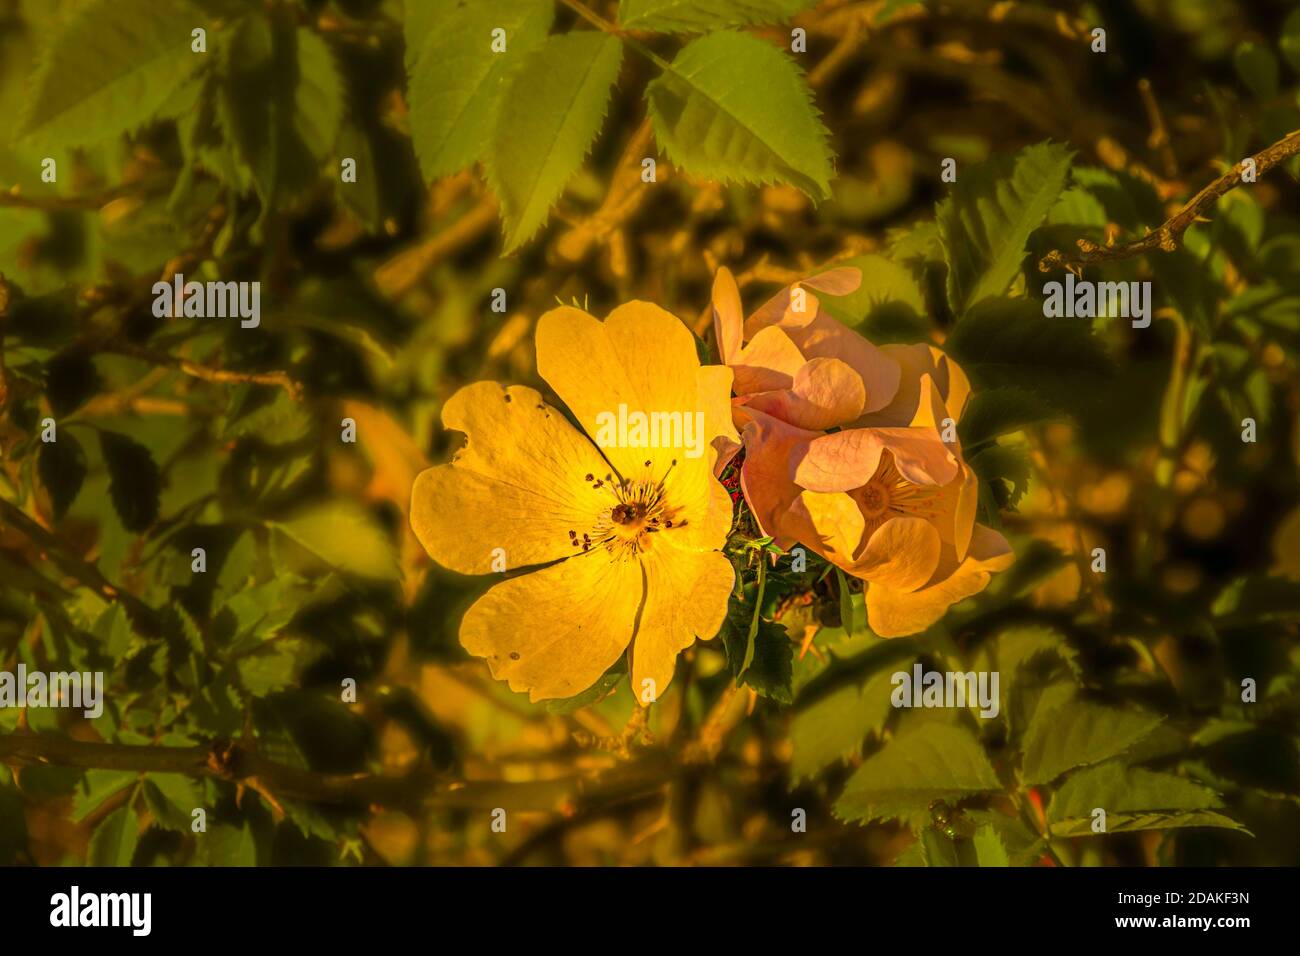 close-up of wild yellow flower surrounded by vegetation Stock Photo